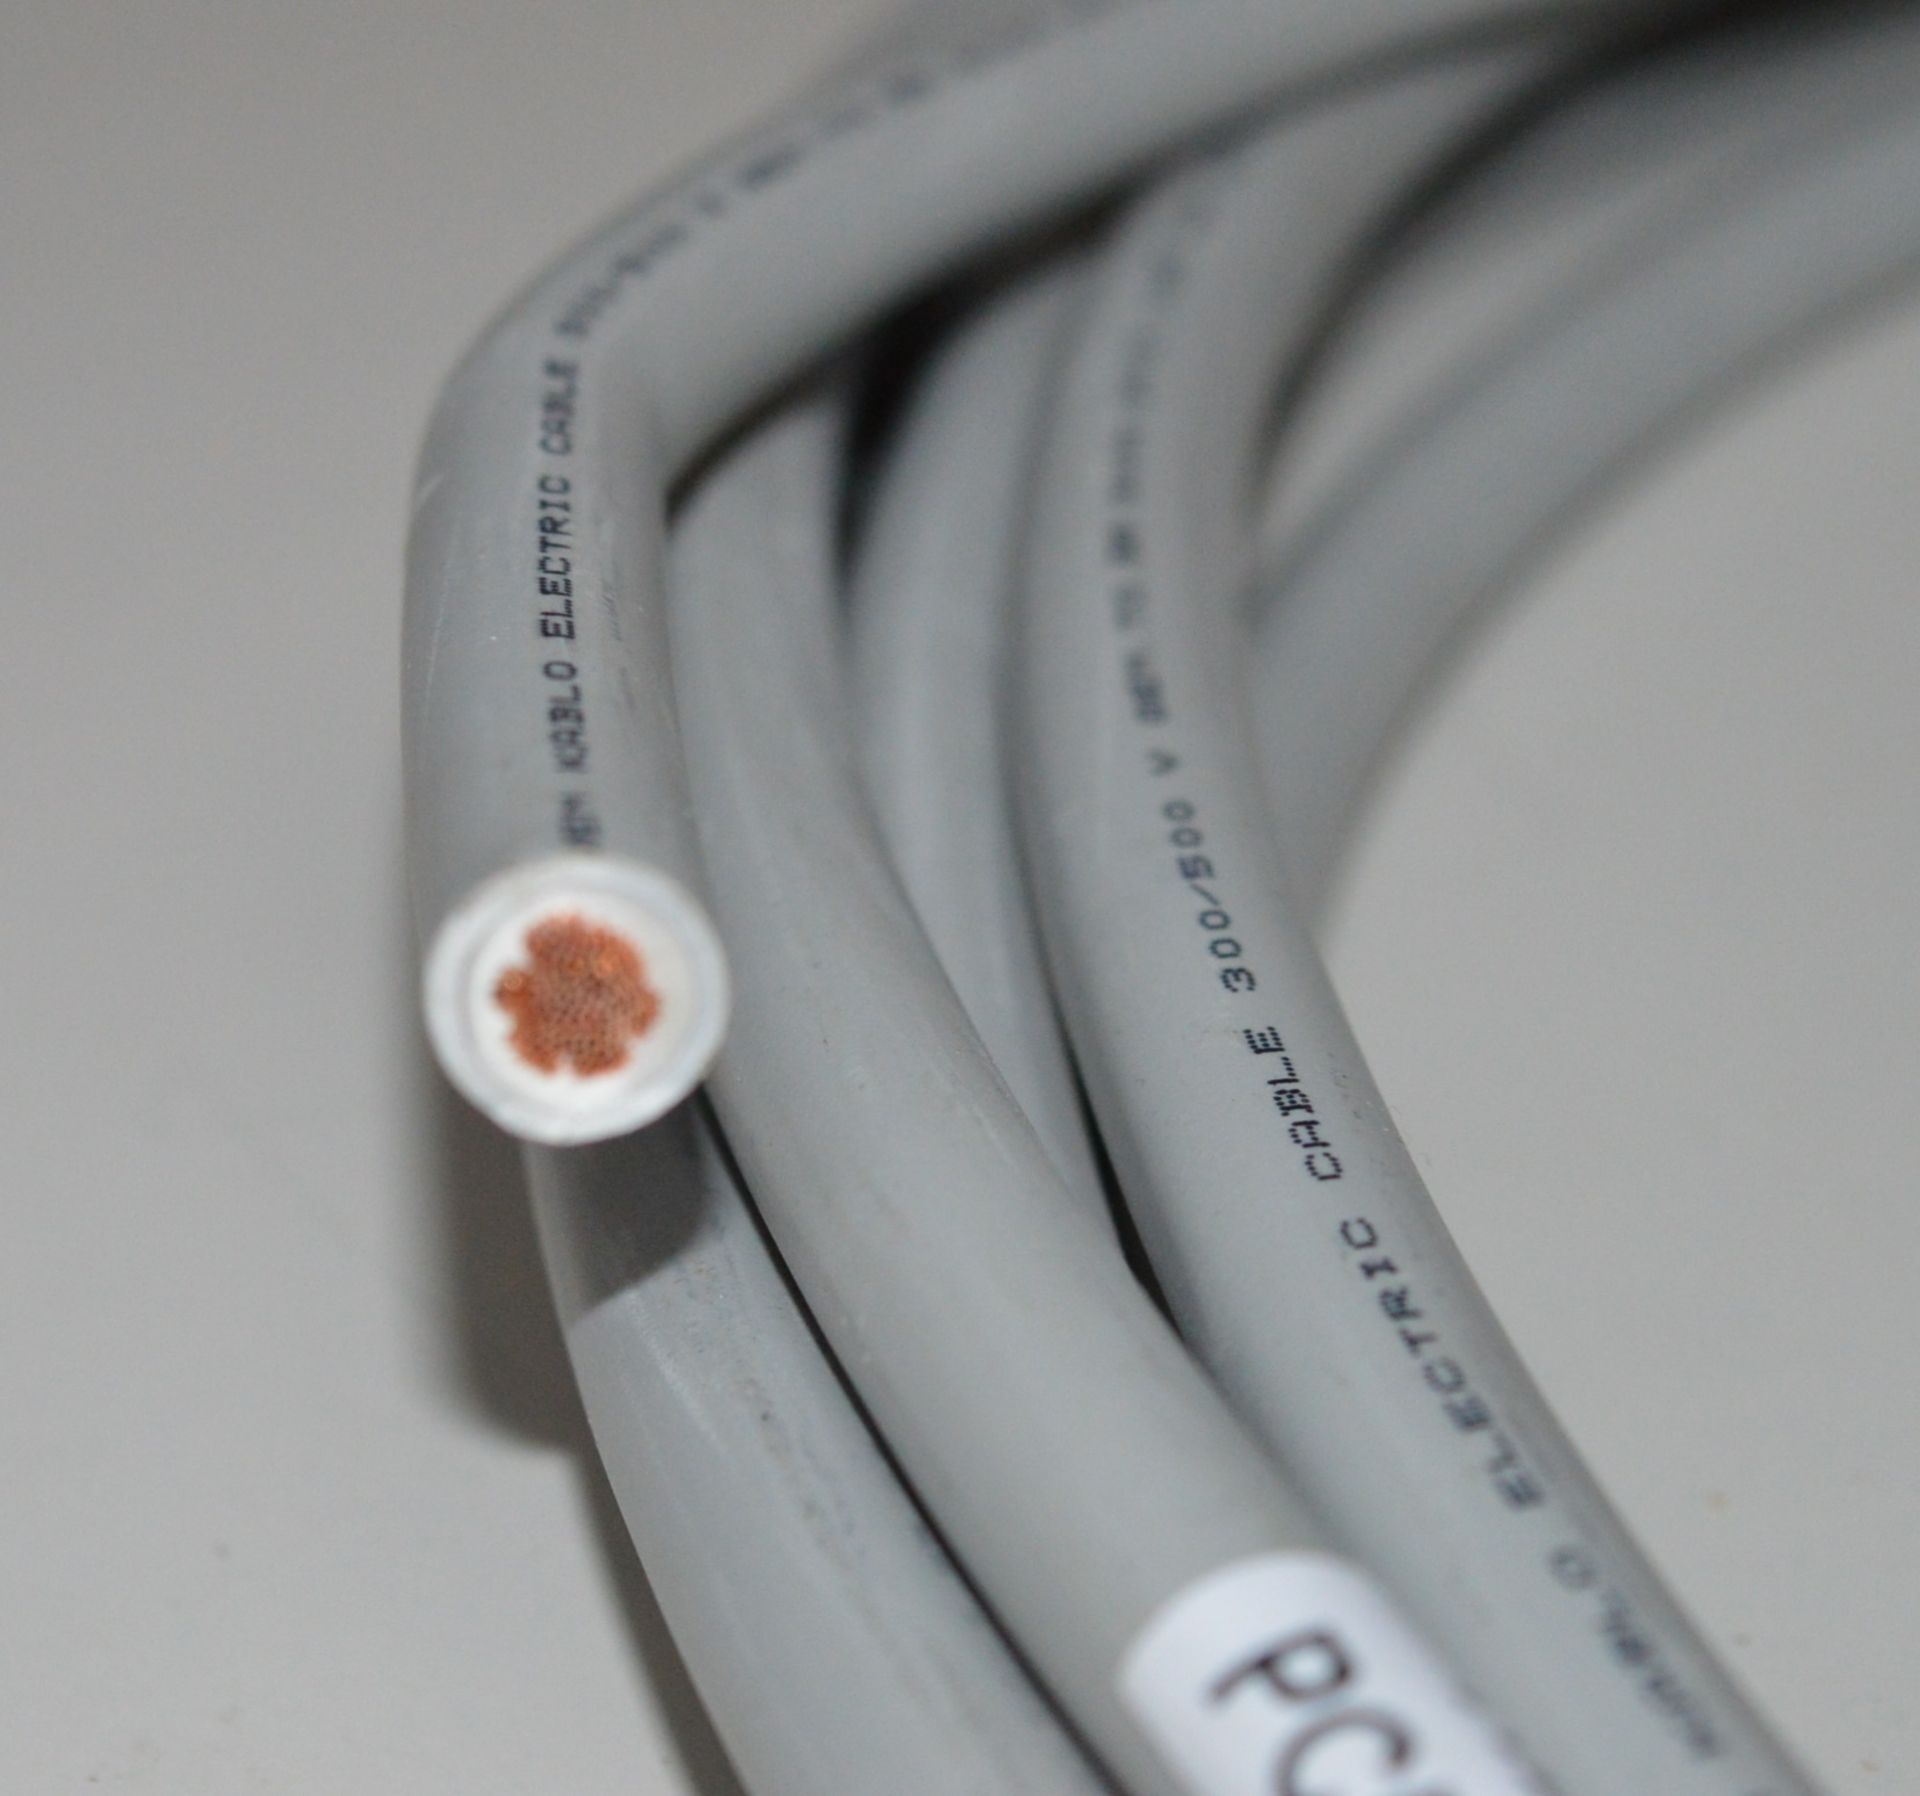 10 x Meters of OZGUVEN Electric Cable 300/500v - Unused - CL300 - Ref PC580 - Location: Altrincham - Image 4 of 5